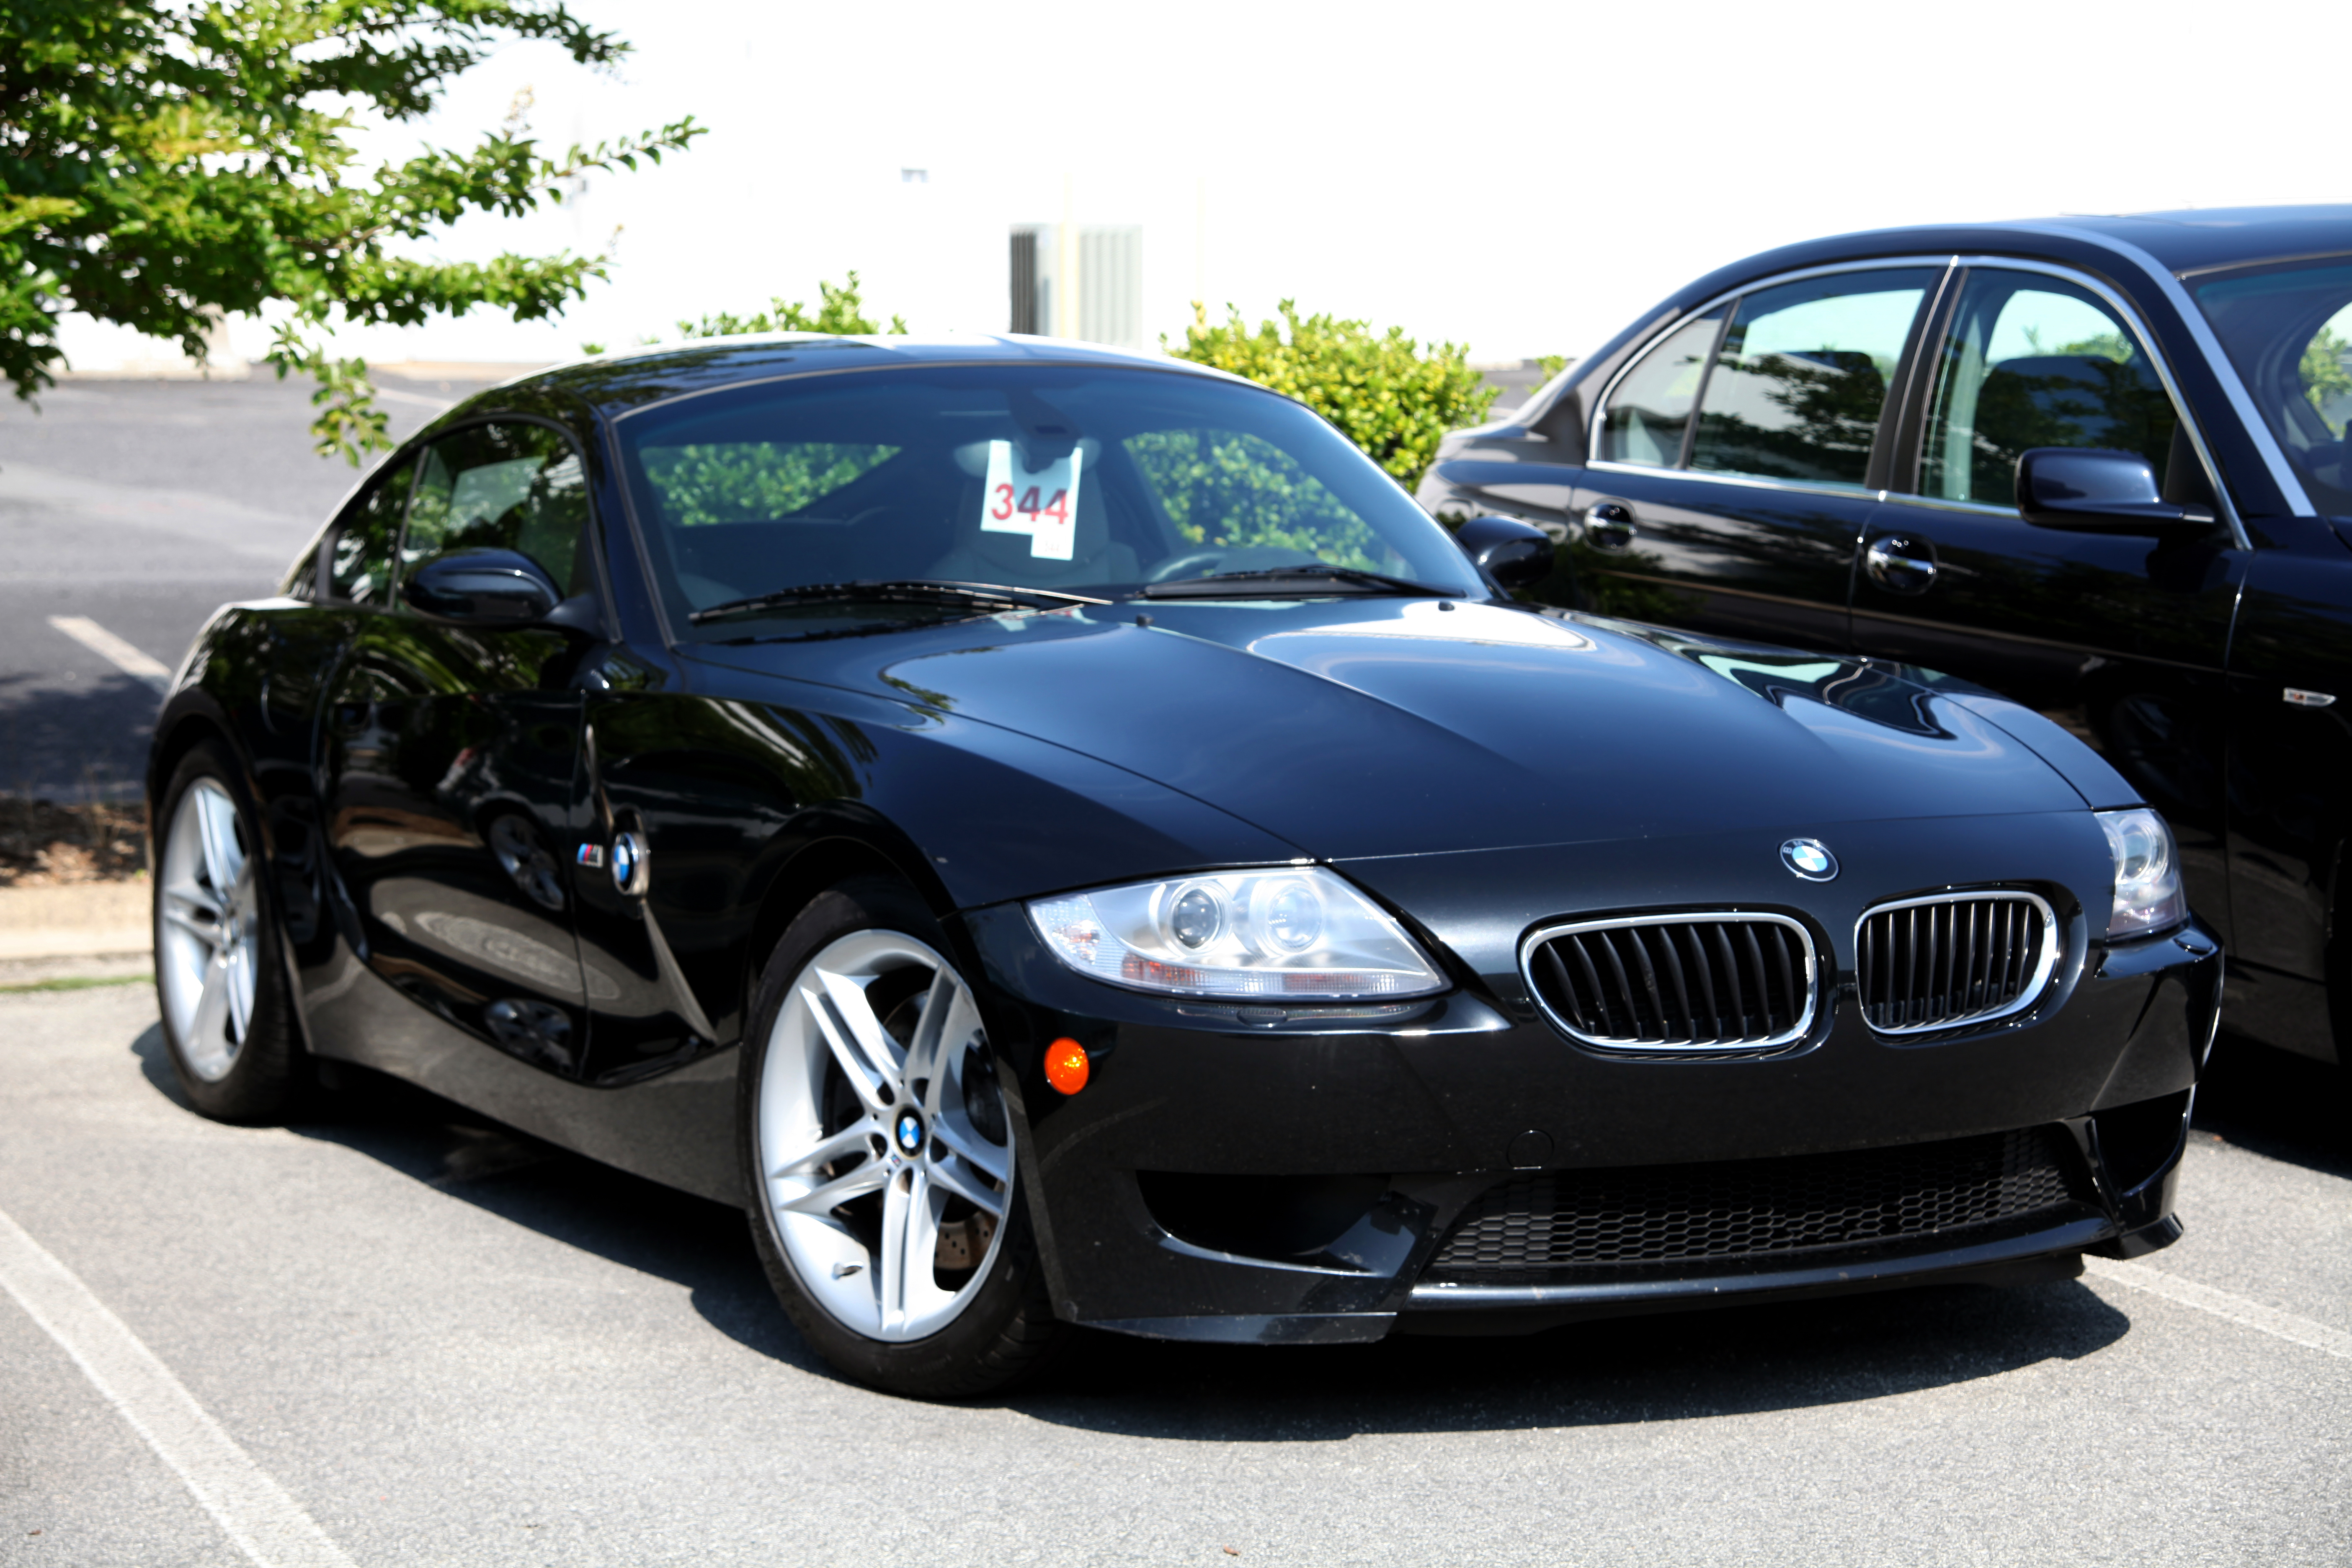 BMW Z4 M Coupe Black | Flickr - Photo Sharing!